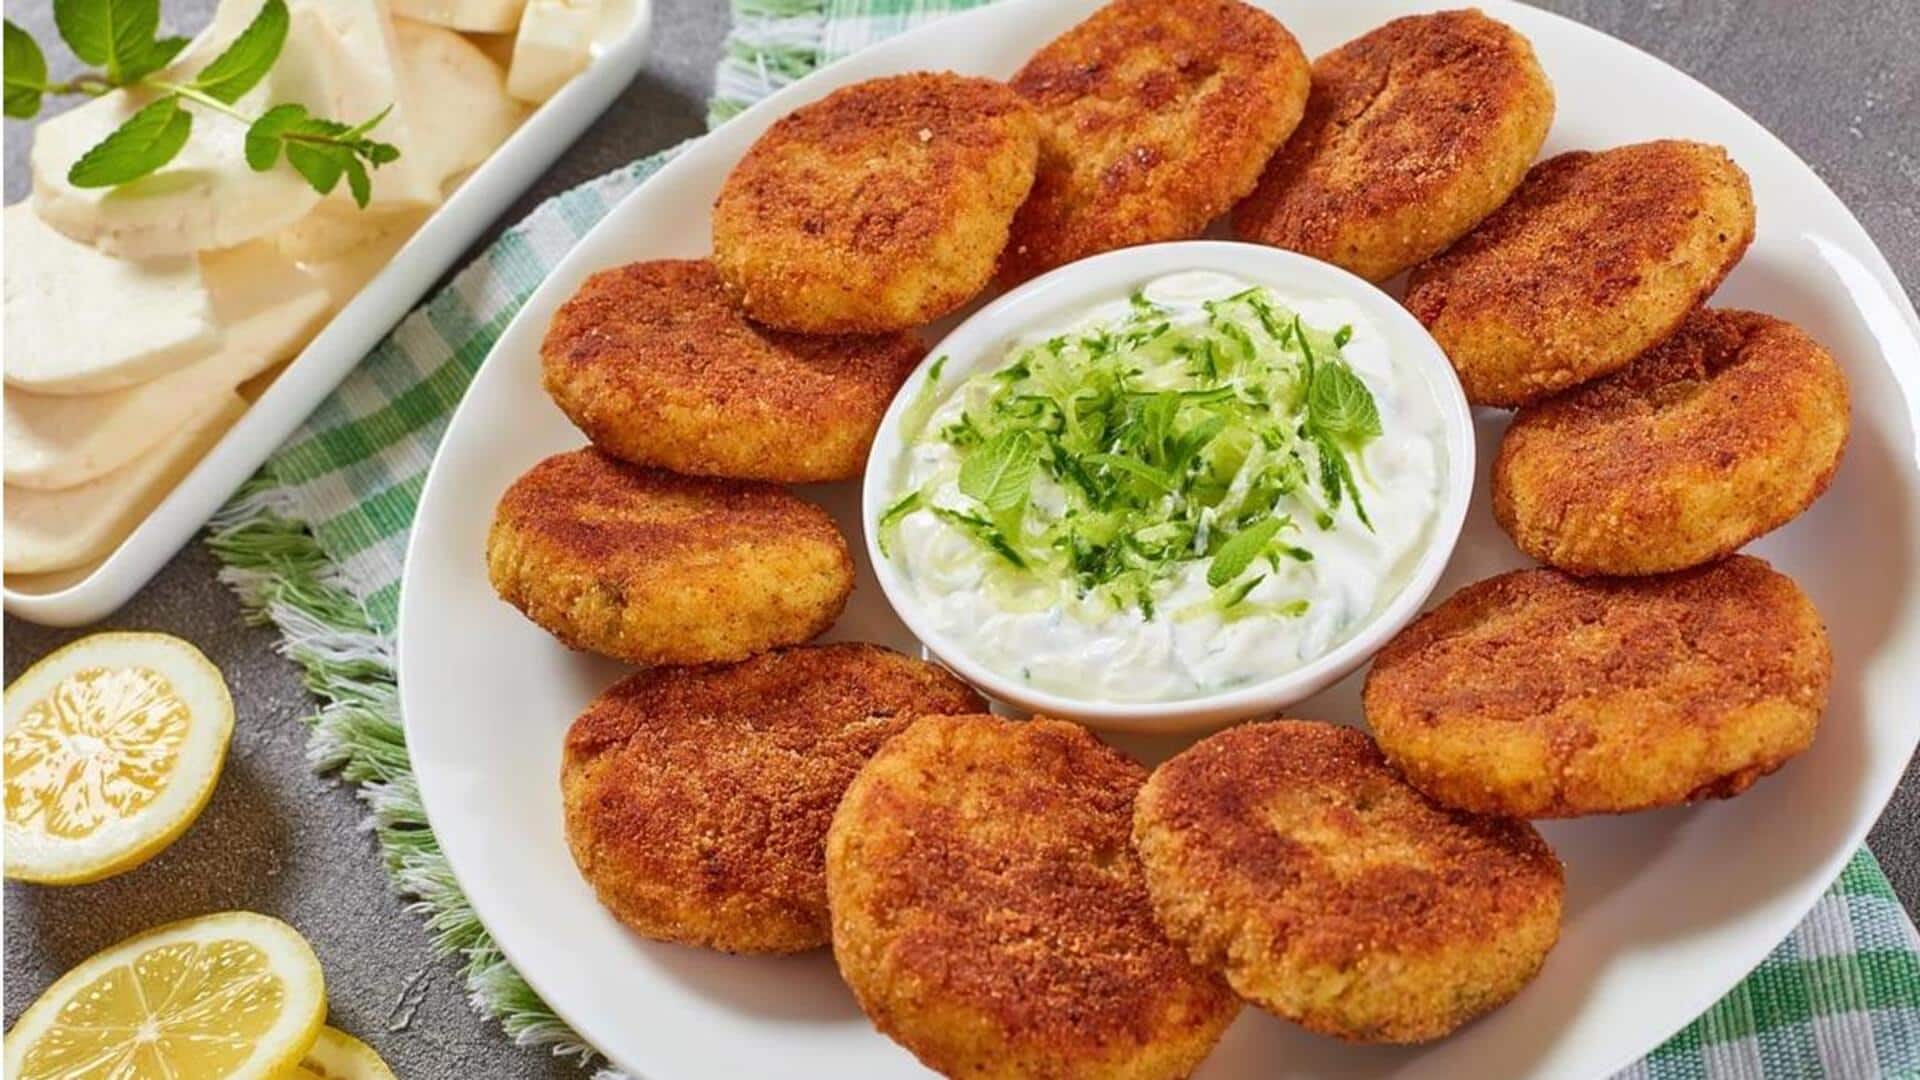 Try this 'oats paneer tikki' recipe for a flavorful day